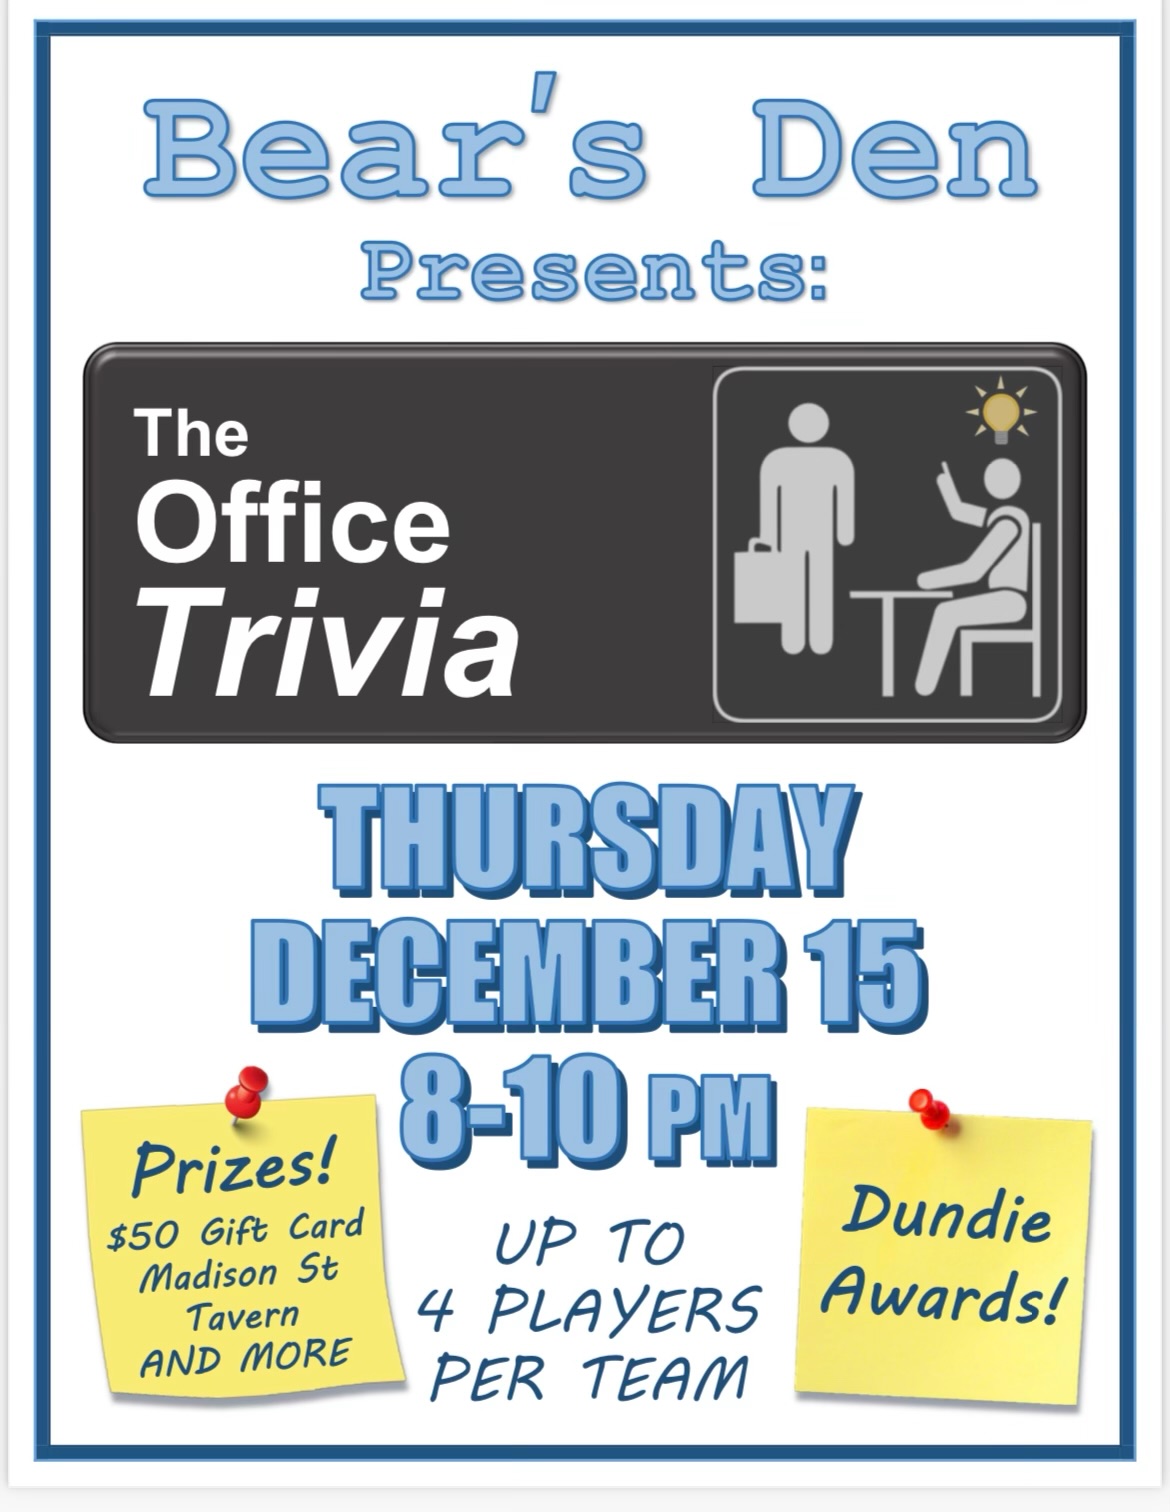 The Office Trivia at The Bear's Den